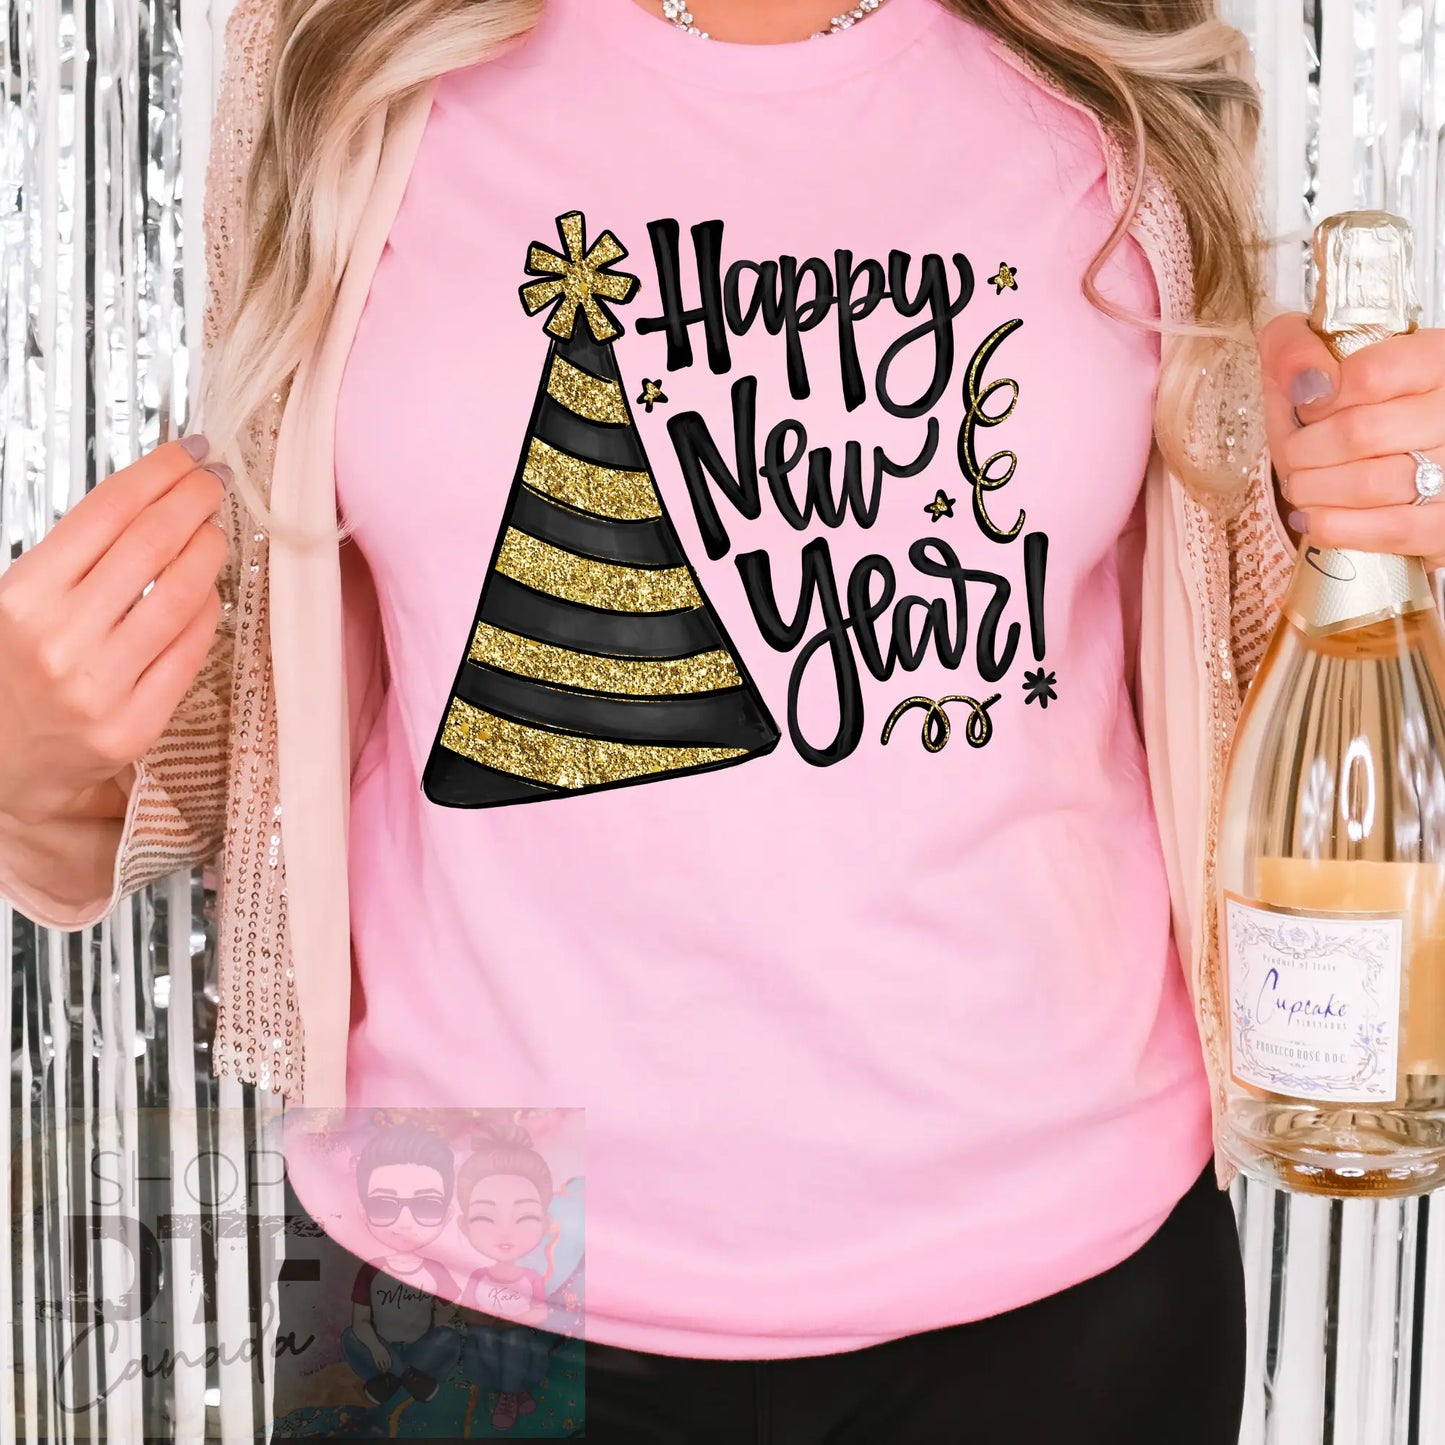 New Years - Happy new year - Shirts & Tops